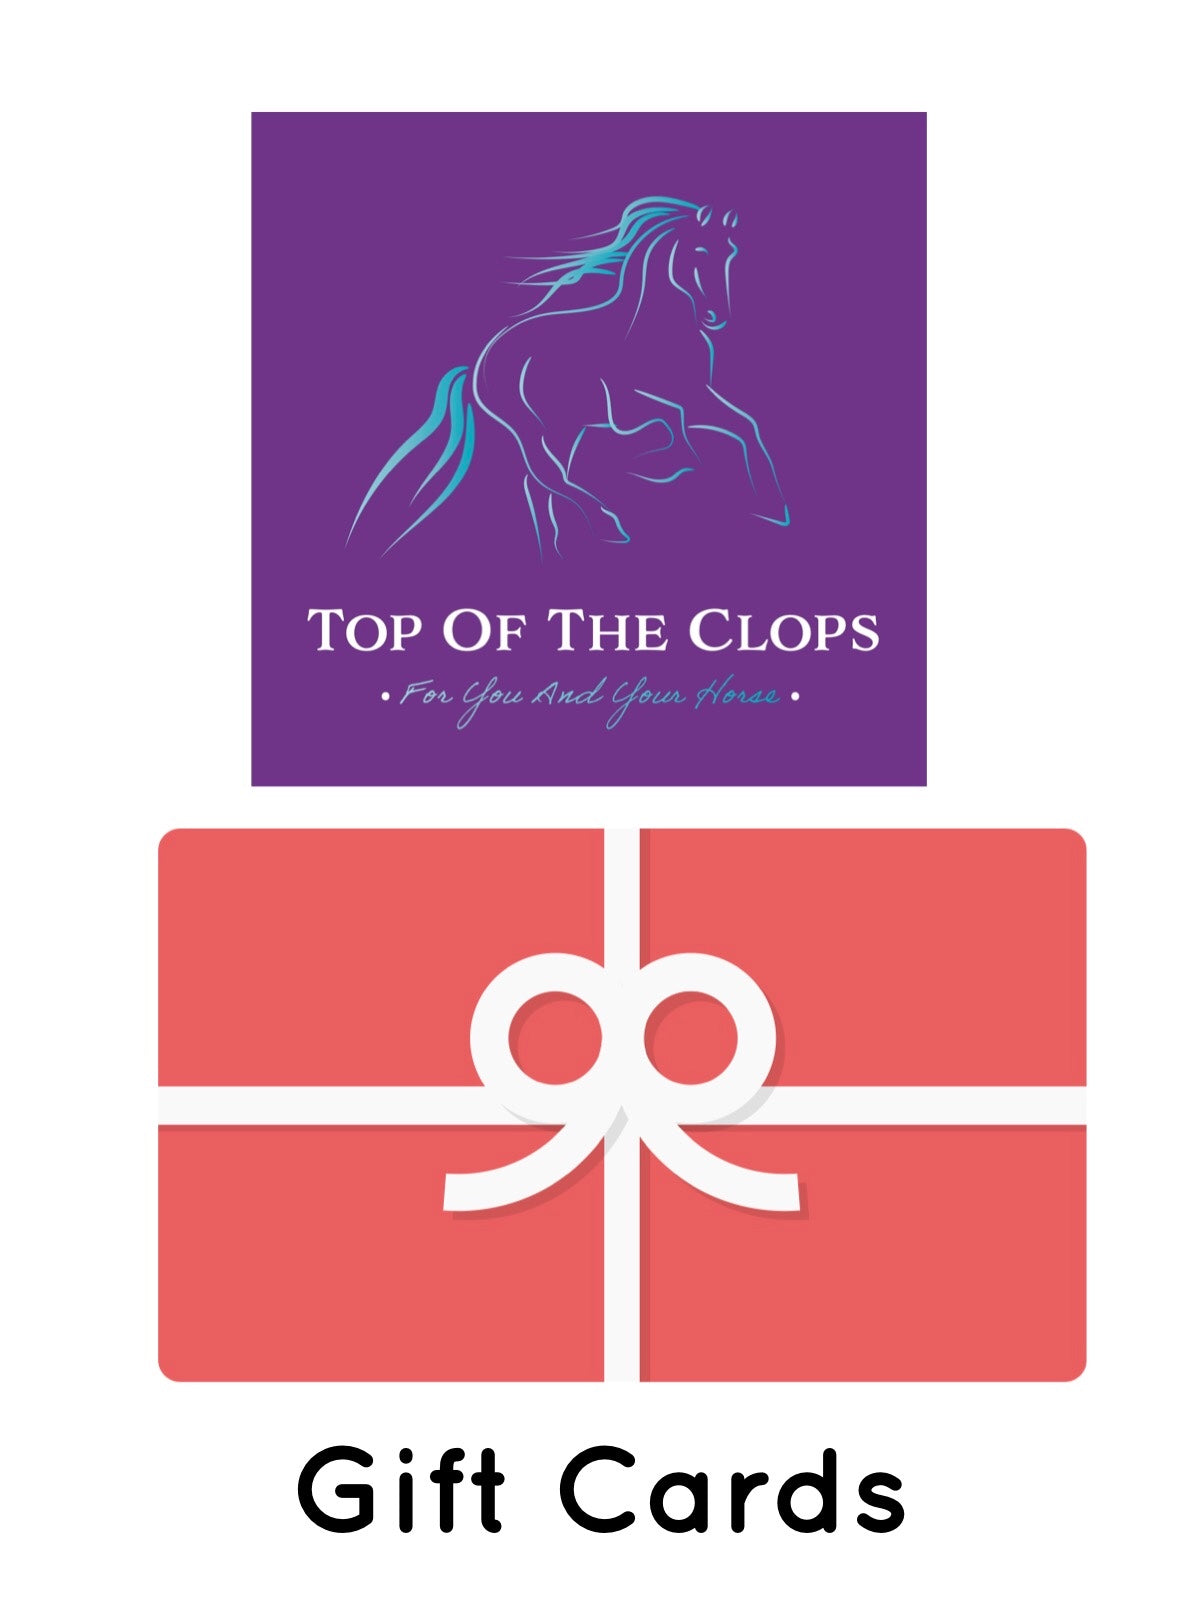 Gift Card - Top Of The Clops